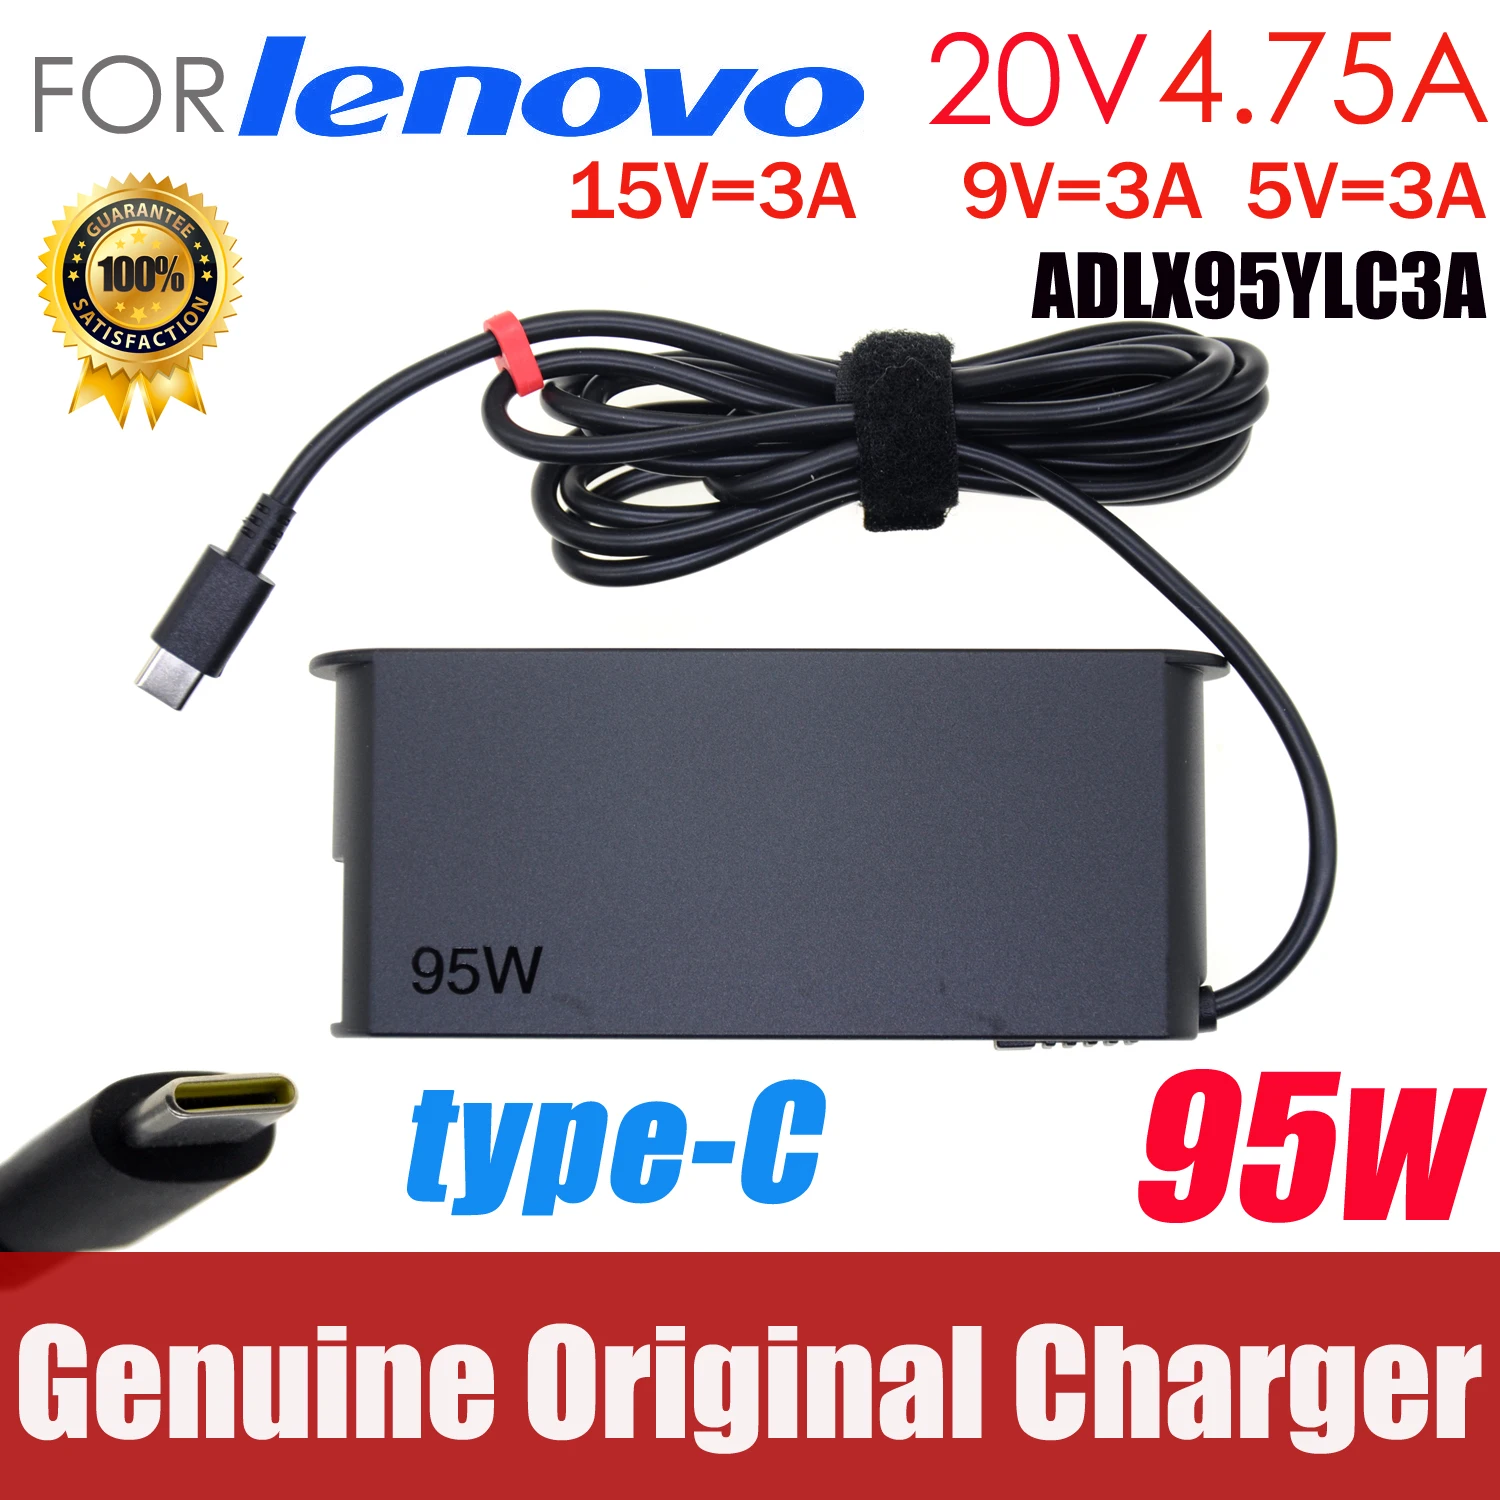 

Genuine 20V 4.75A 95W ADLX95YLC3A ADLX95YCC3A Power Supply AC Adapter For LENOVO THINKPAD Y740S X1 TABLET 2016 Laptop Charger